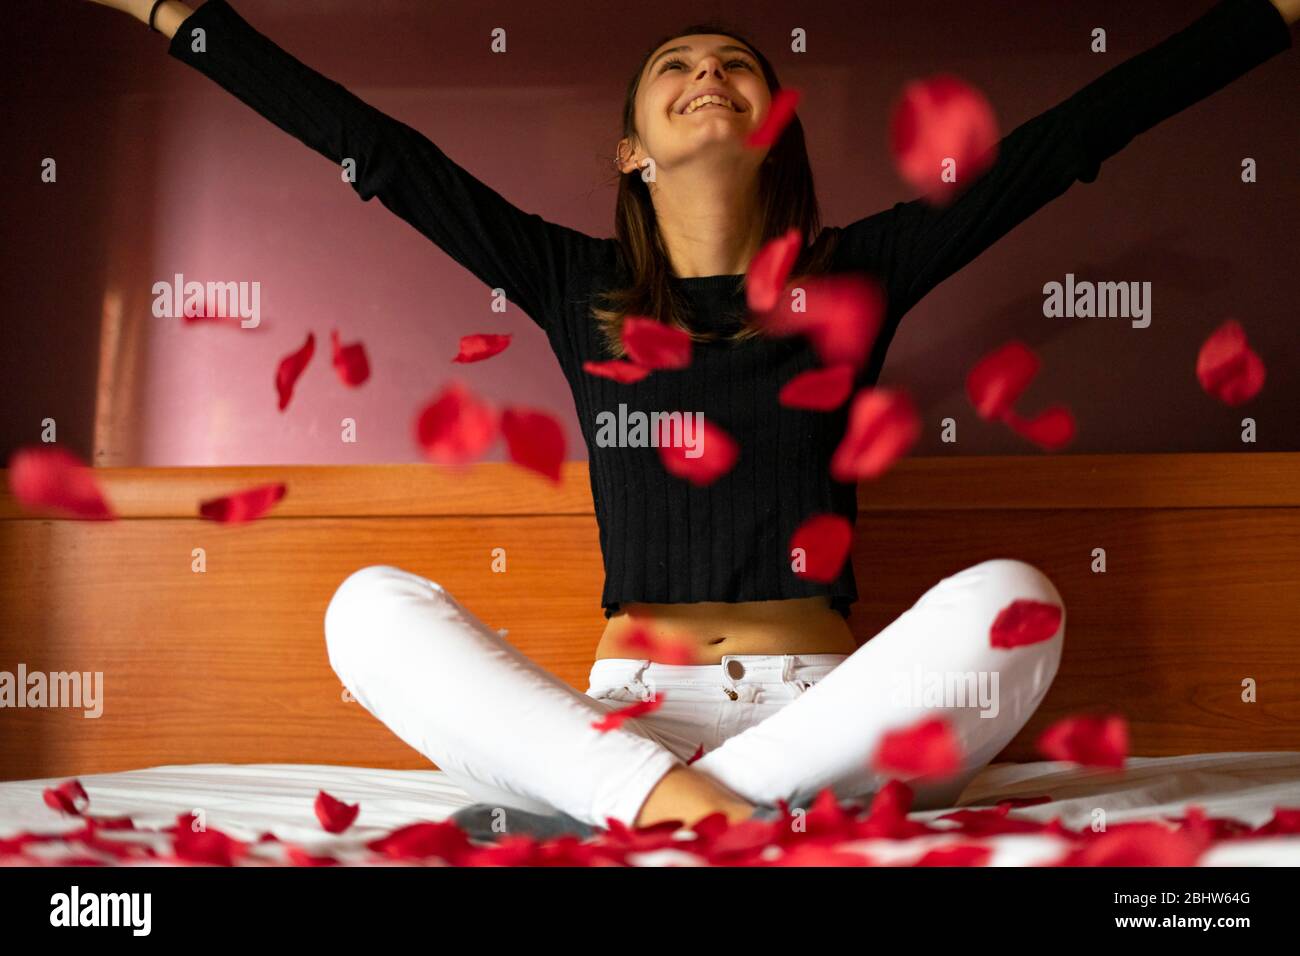 Woman throwing rose petals on the bed. Rose petals and happiness concept. Stock Photo